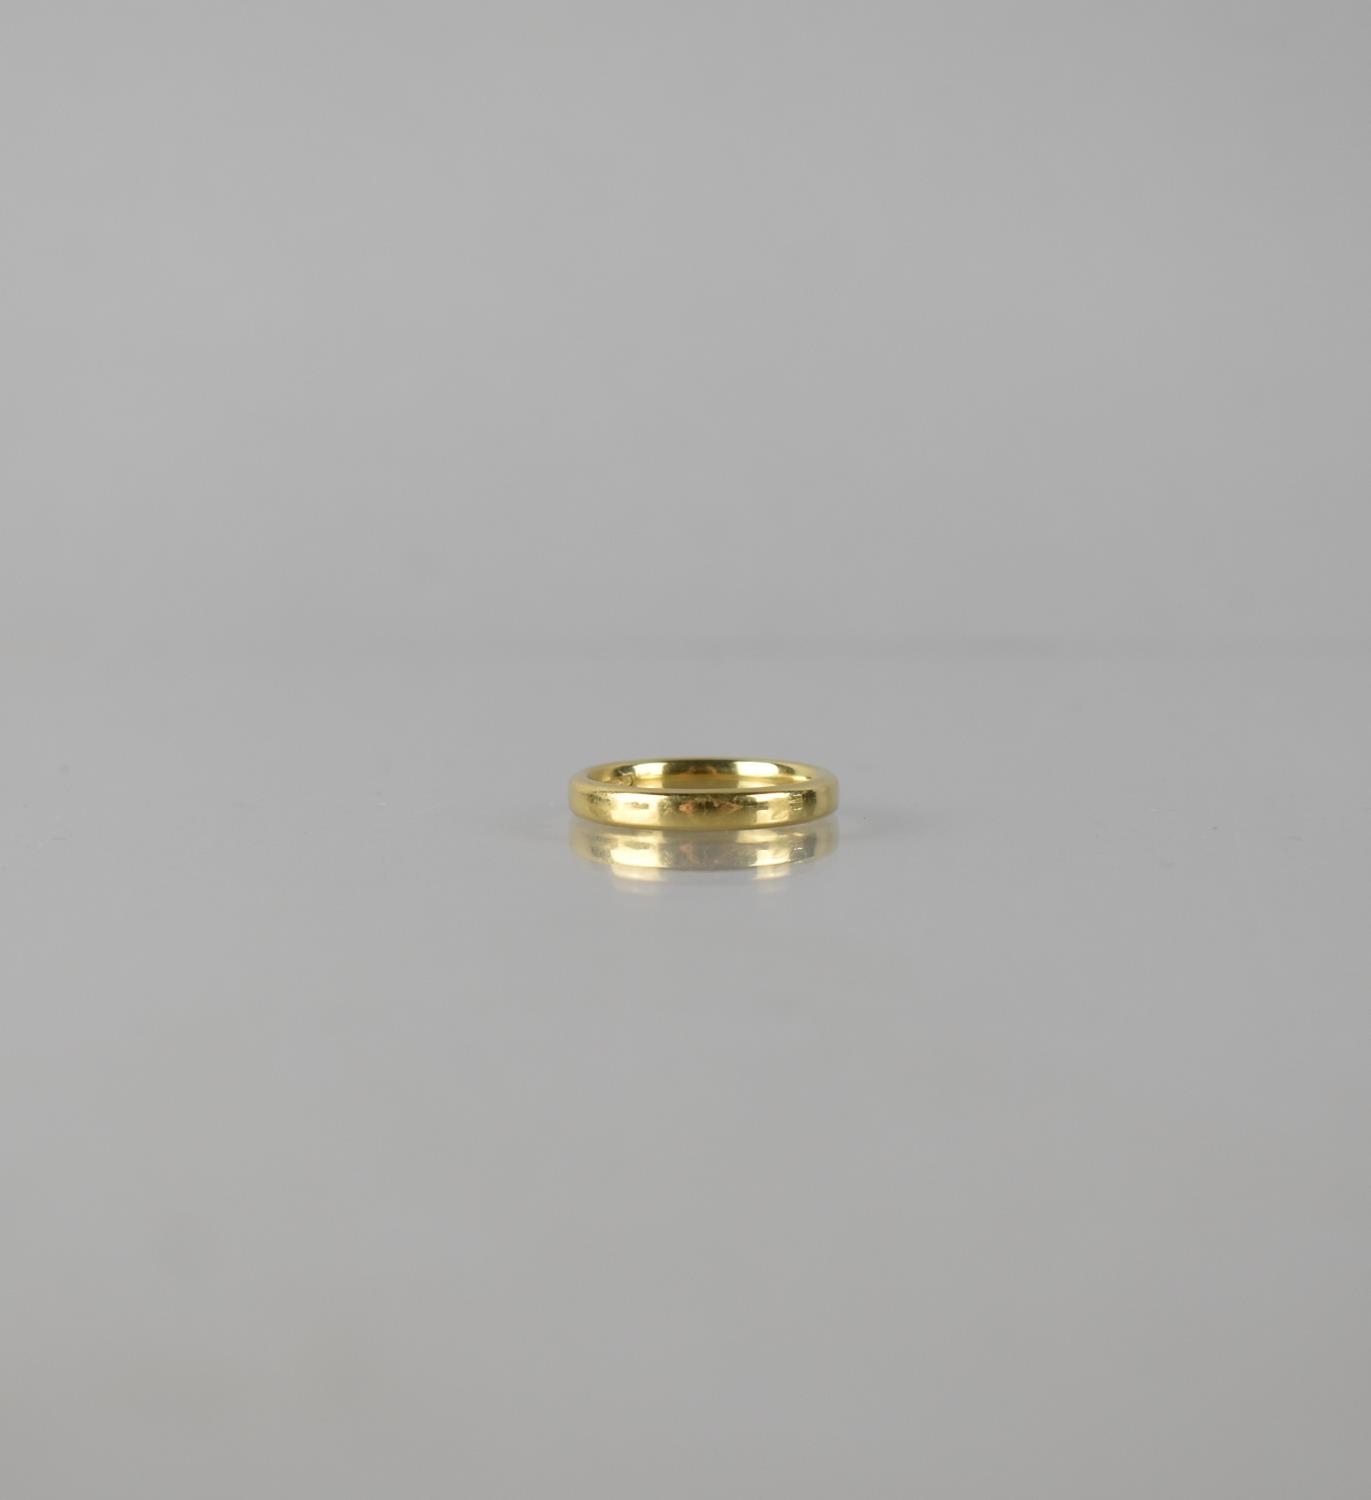 An 18ct Polished Gold Wedding Band, Court Shaped, Band Stamped for Birmingham, 750, Size M, Makers